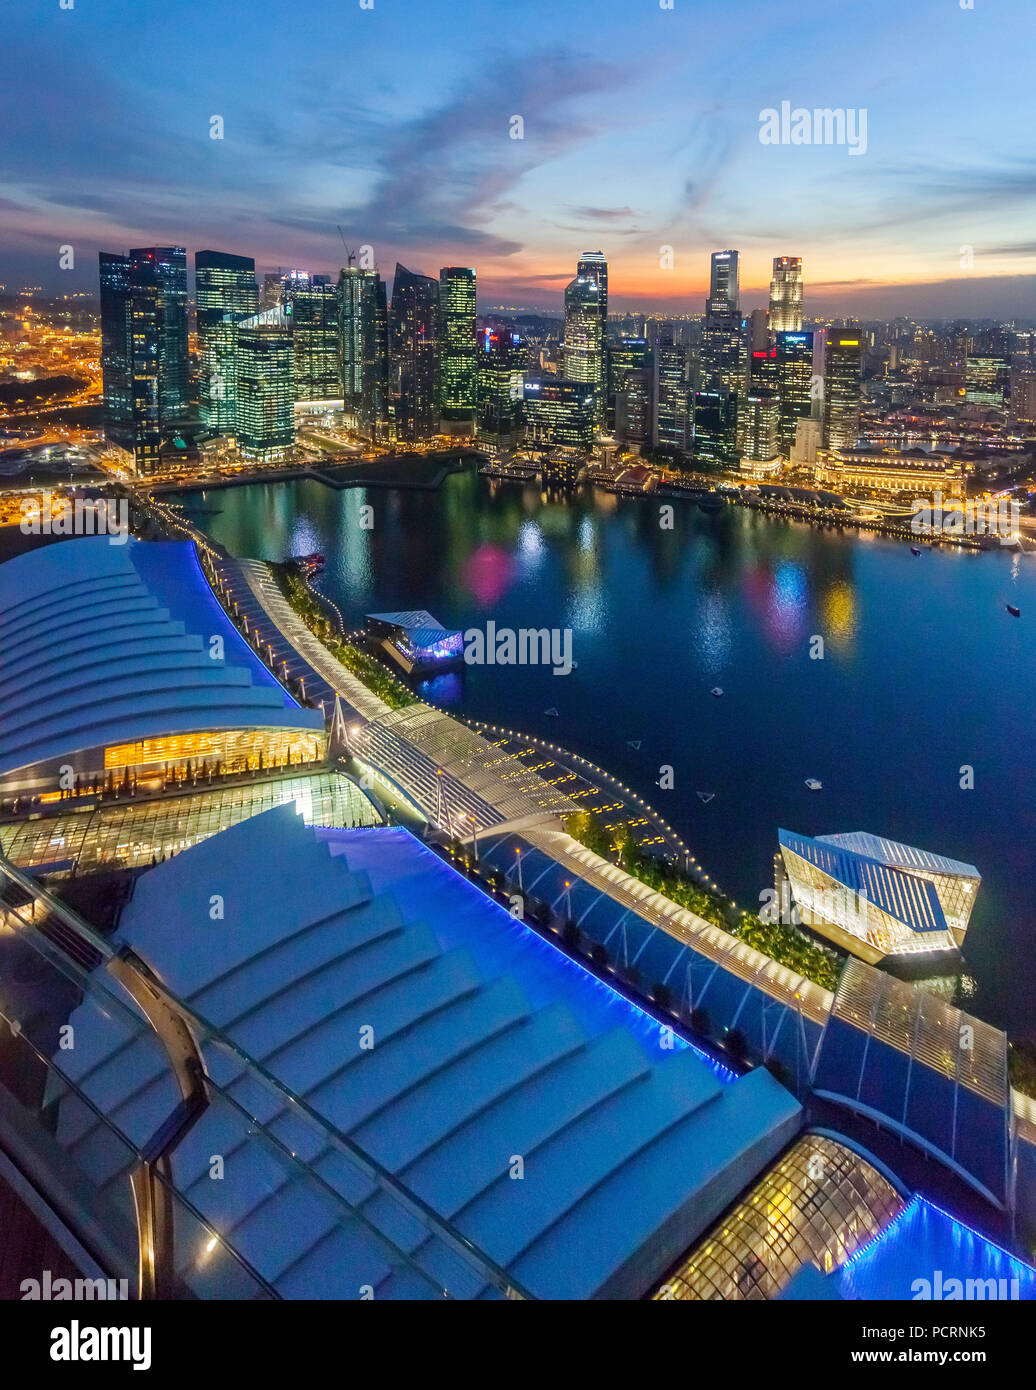 Skyline, Night Scene, Financial District, Central Business District, Marina Bay, Panoramic, Singapore, Asia, Singapore Stock Photo